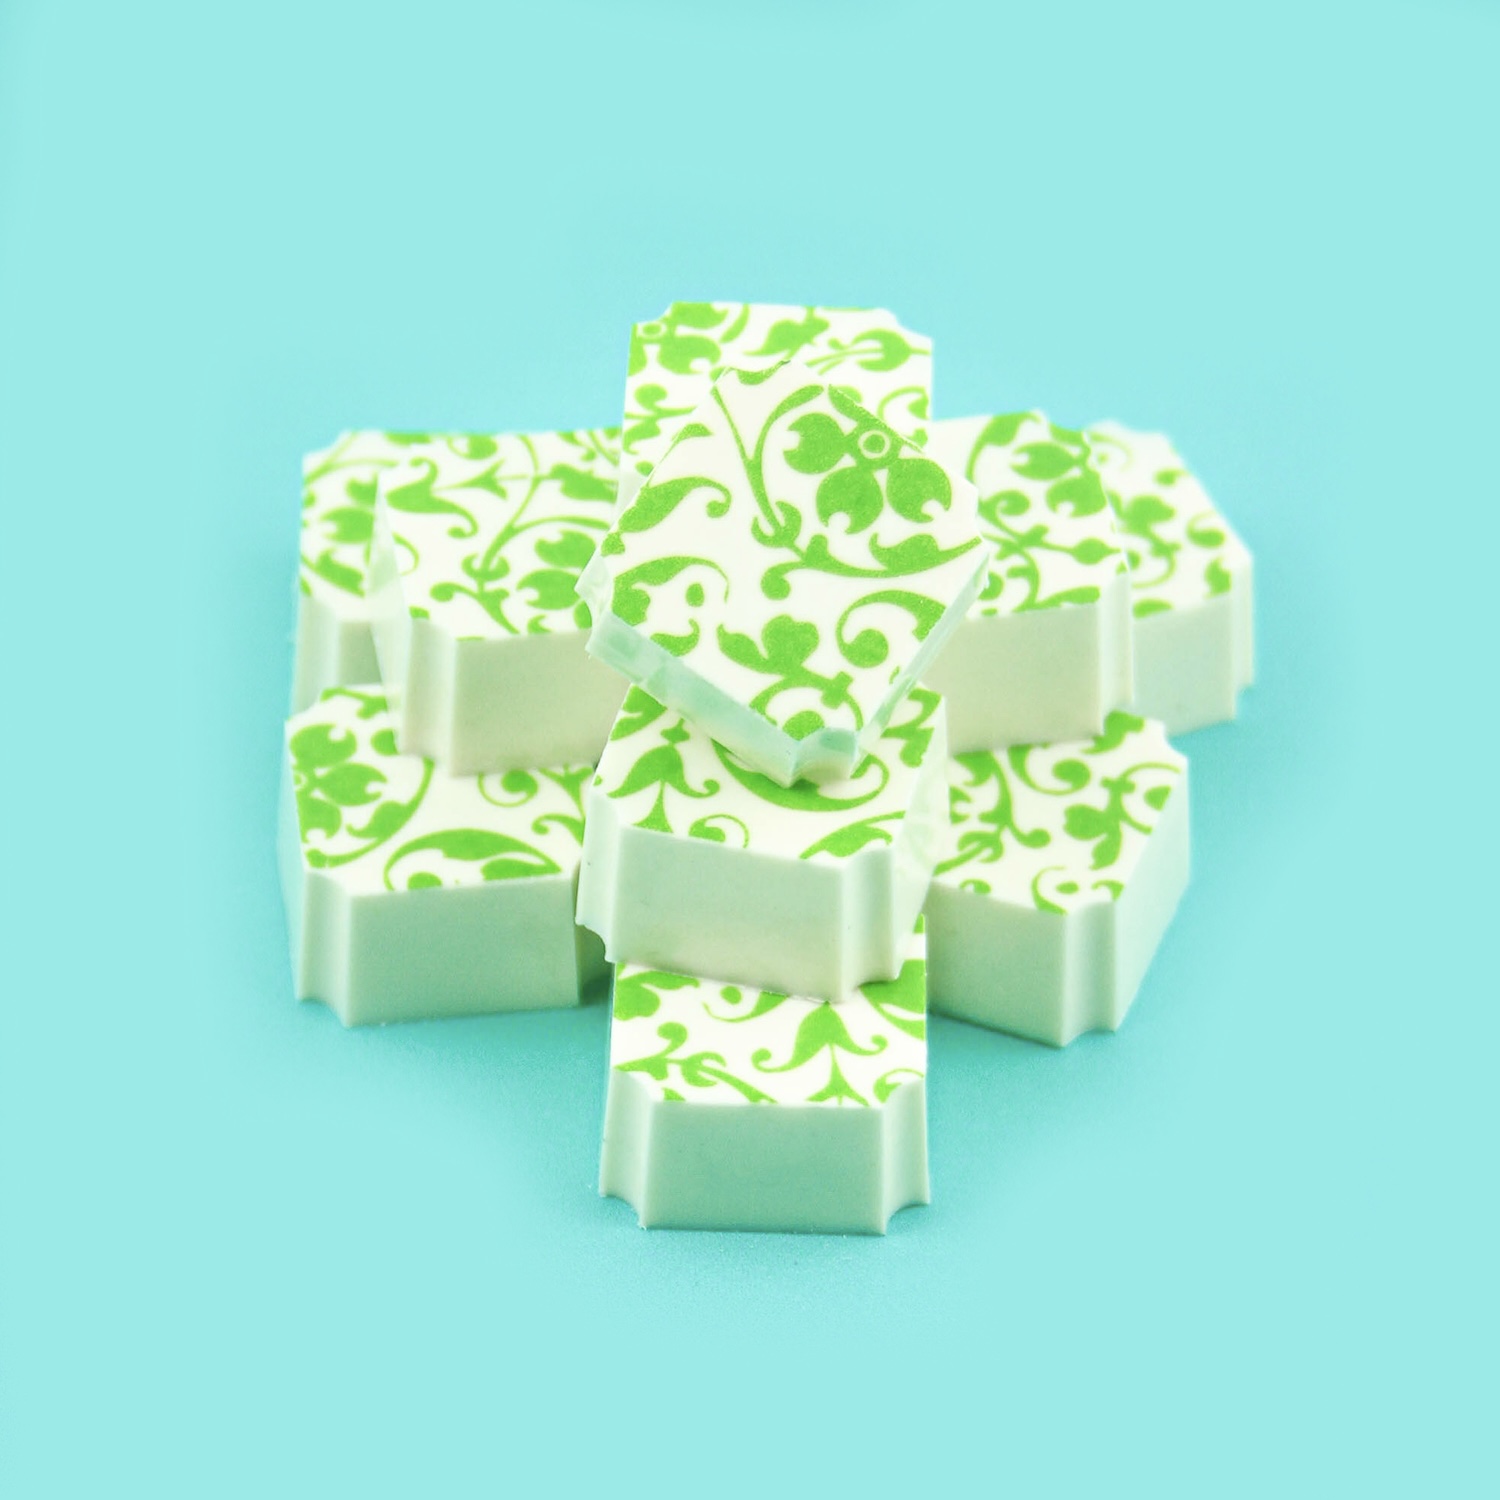 White chocolate bonbon filled with a creme de menthe candy center.  Green swirl pattern on the chocolate.